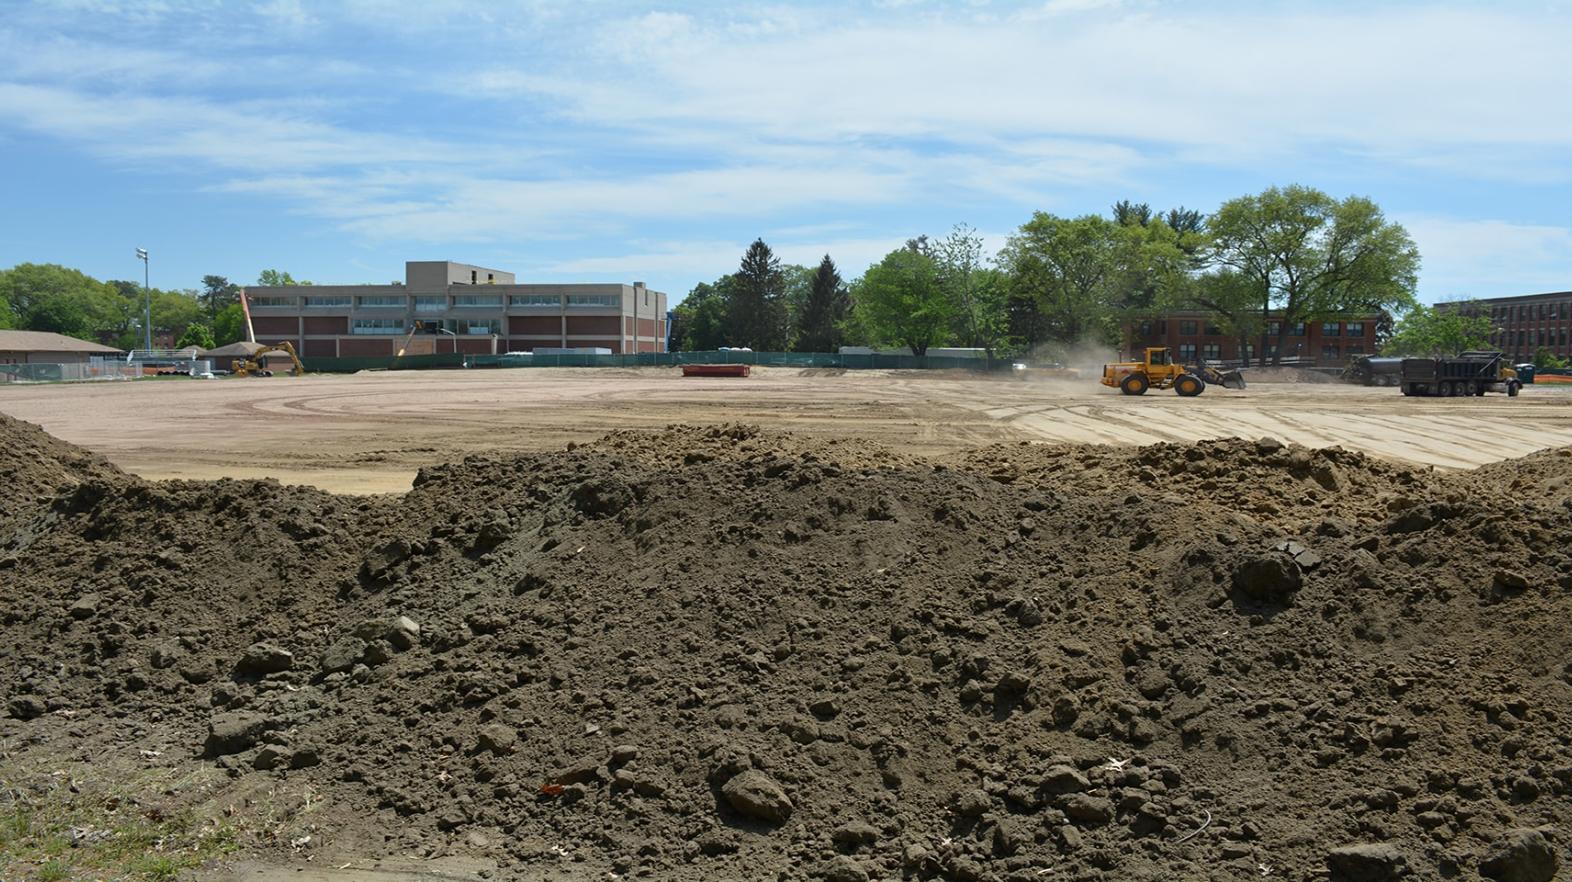 The old Berry-Allen Field we knew is gone and we start the process of building a new Berry-Allen Field. (May 2017)